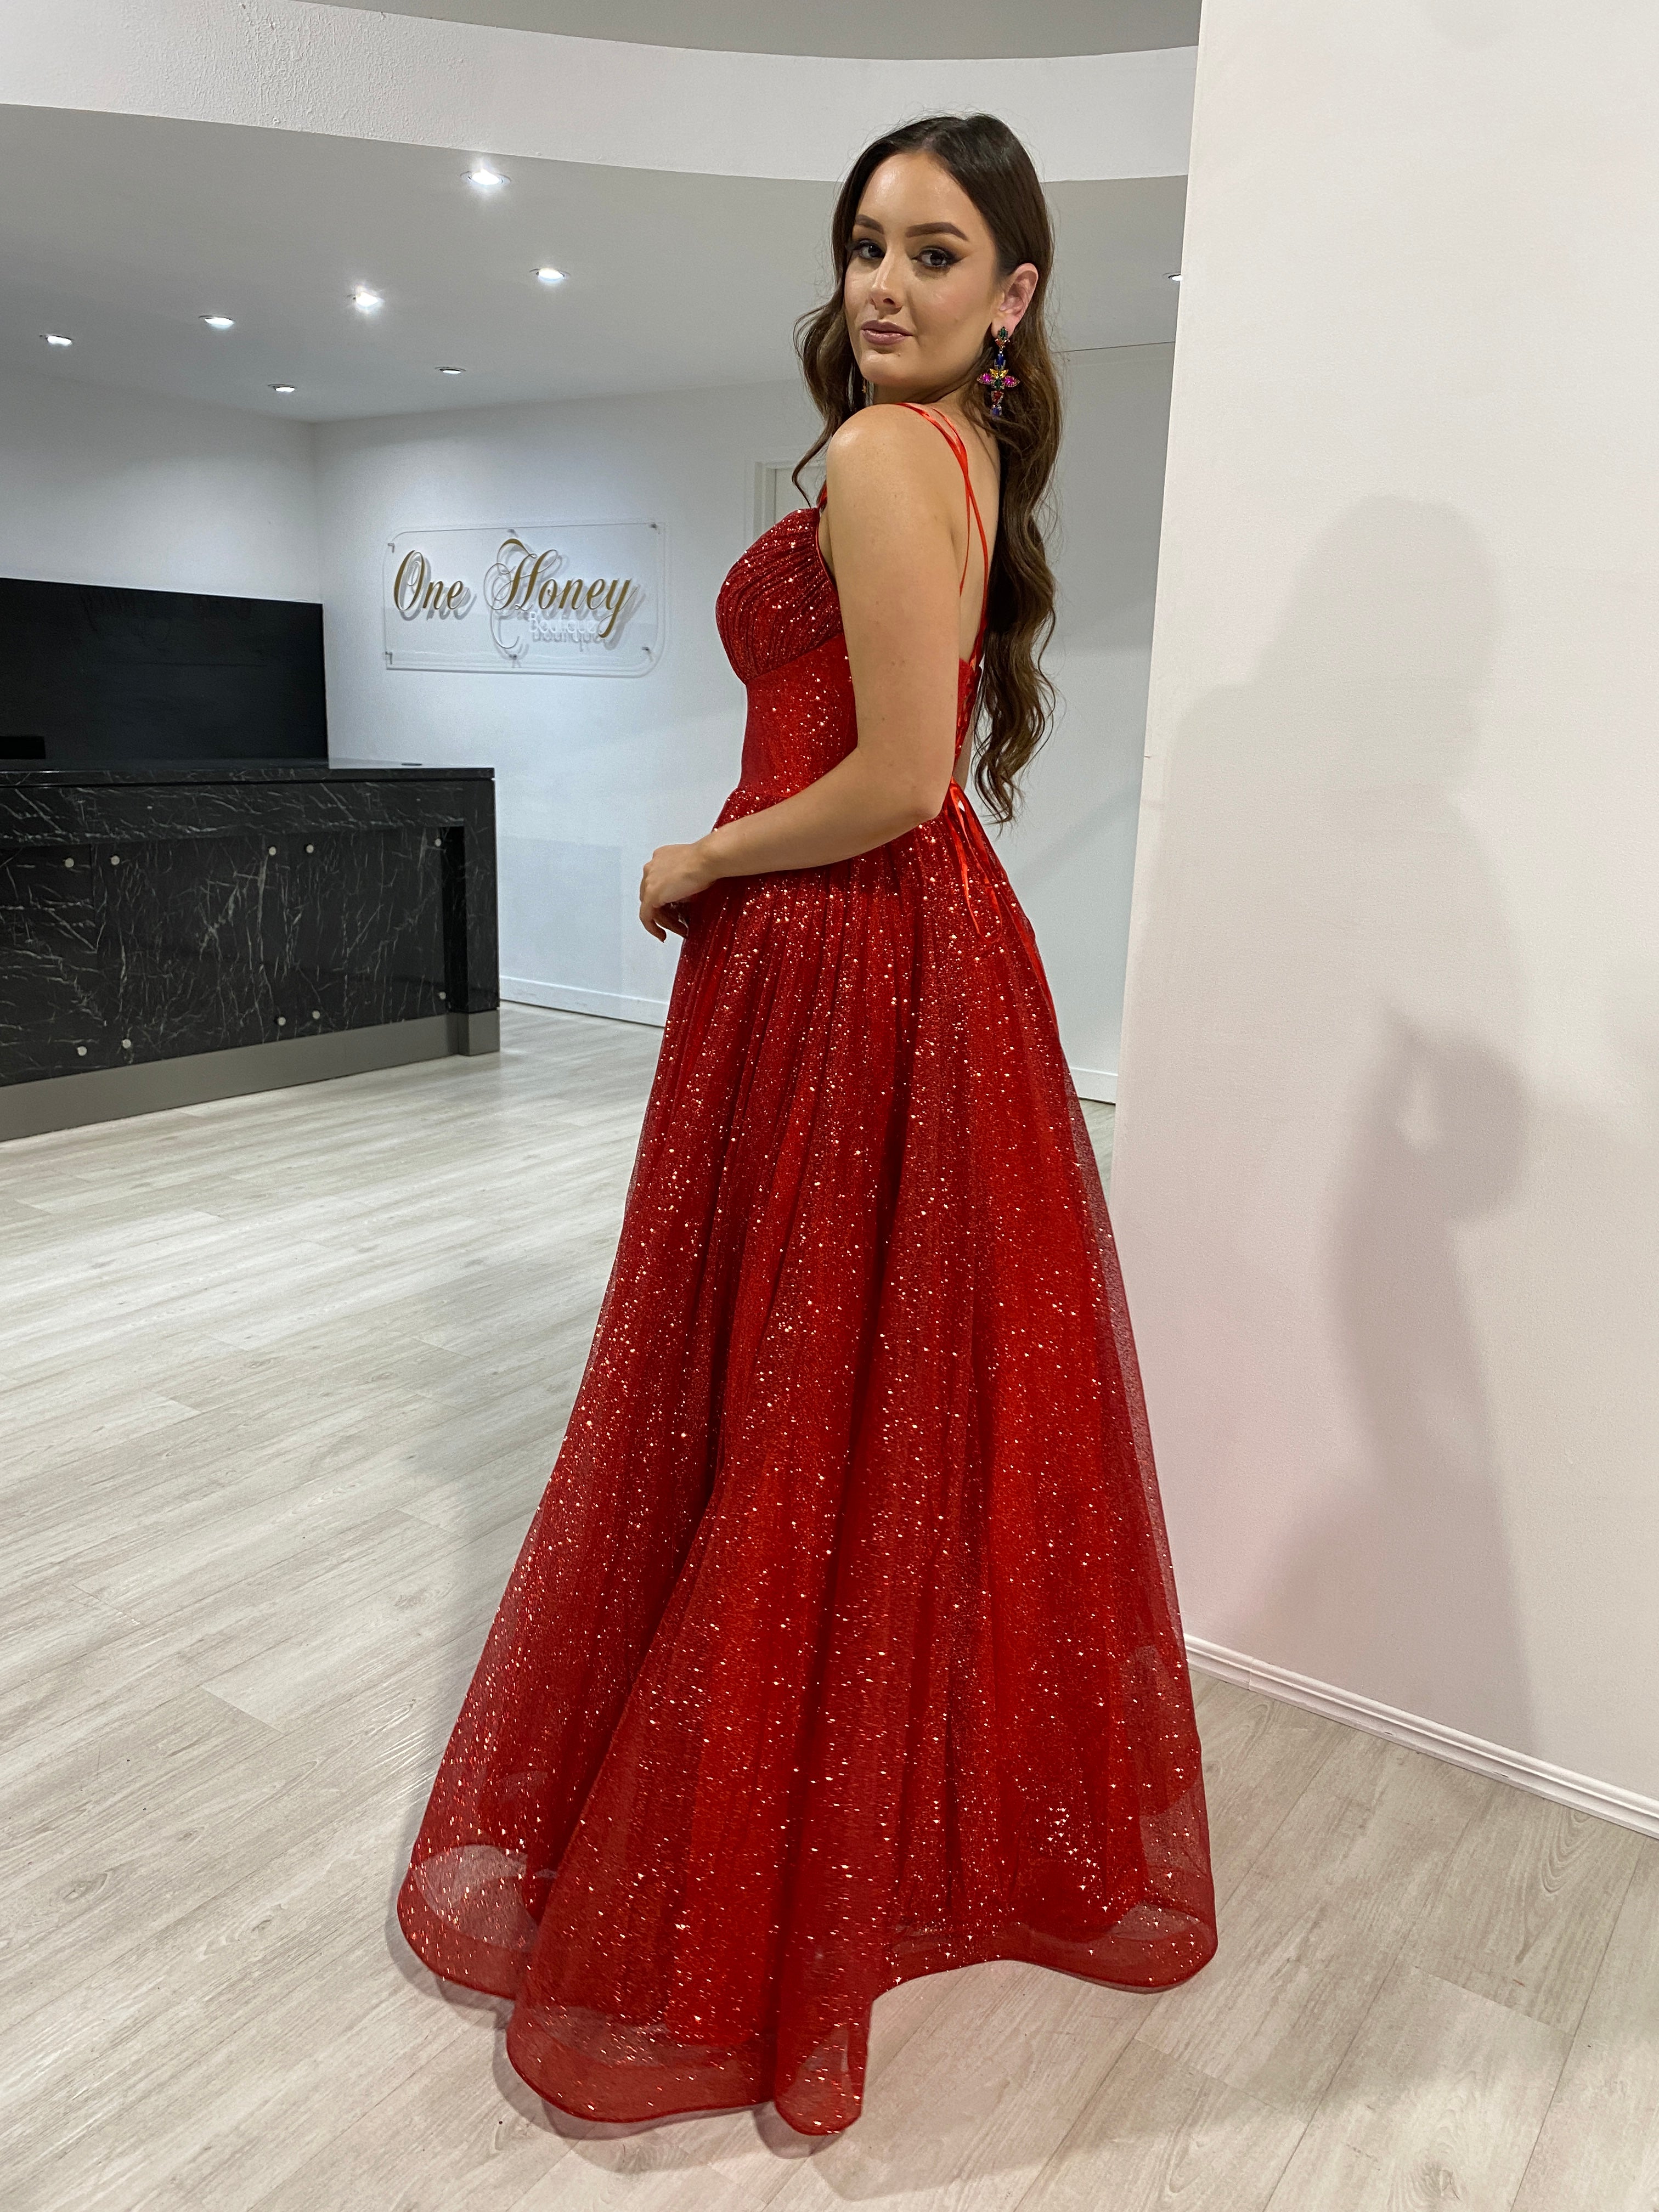 Red illusion sweetheart or off the shoulder sparkle princess ball gown  wedding/prom dress with glitter tulle & train - various styles